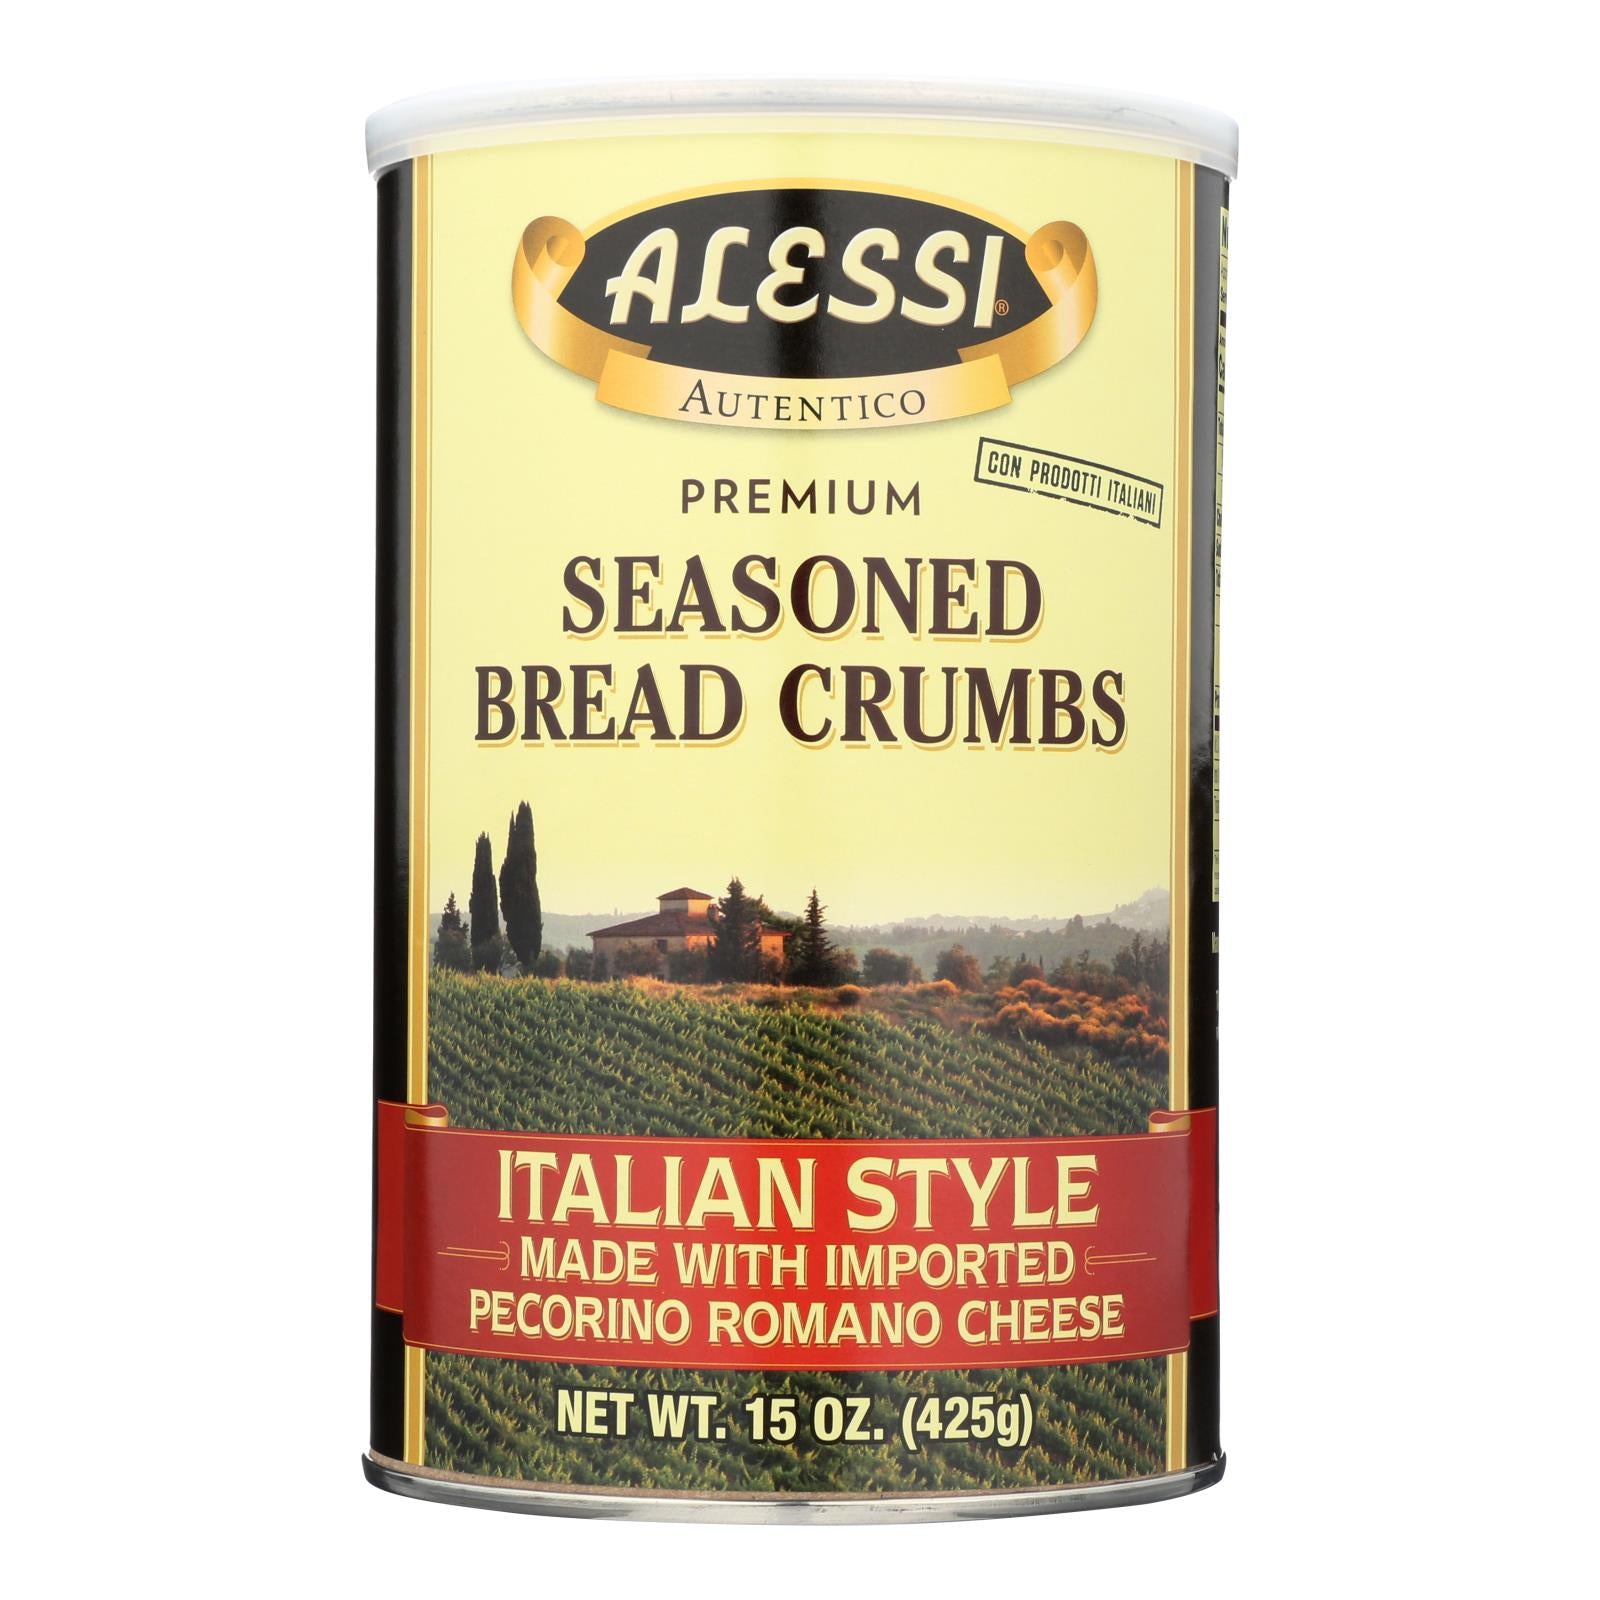 Alessi - Italian Style Made With Imported Pecorino Romano Cheese - Case Of 6 - 15 Oz - Whole Green Foods